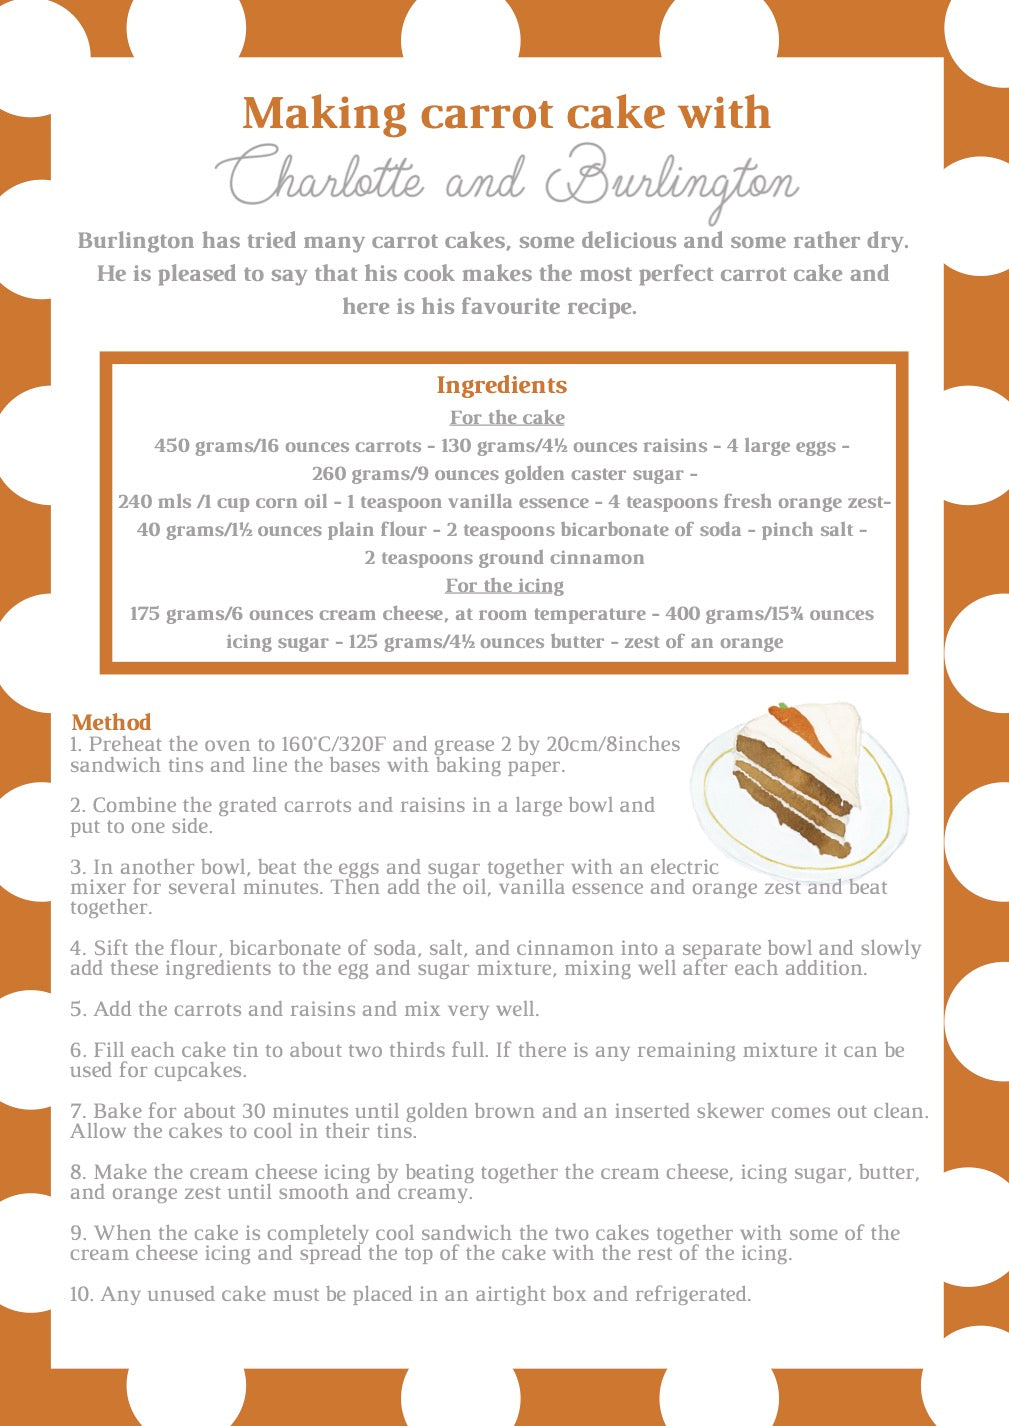 Charlotte and Burlington British carrot cake recipe  : family easy cooking ideas